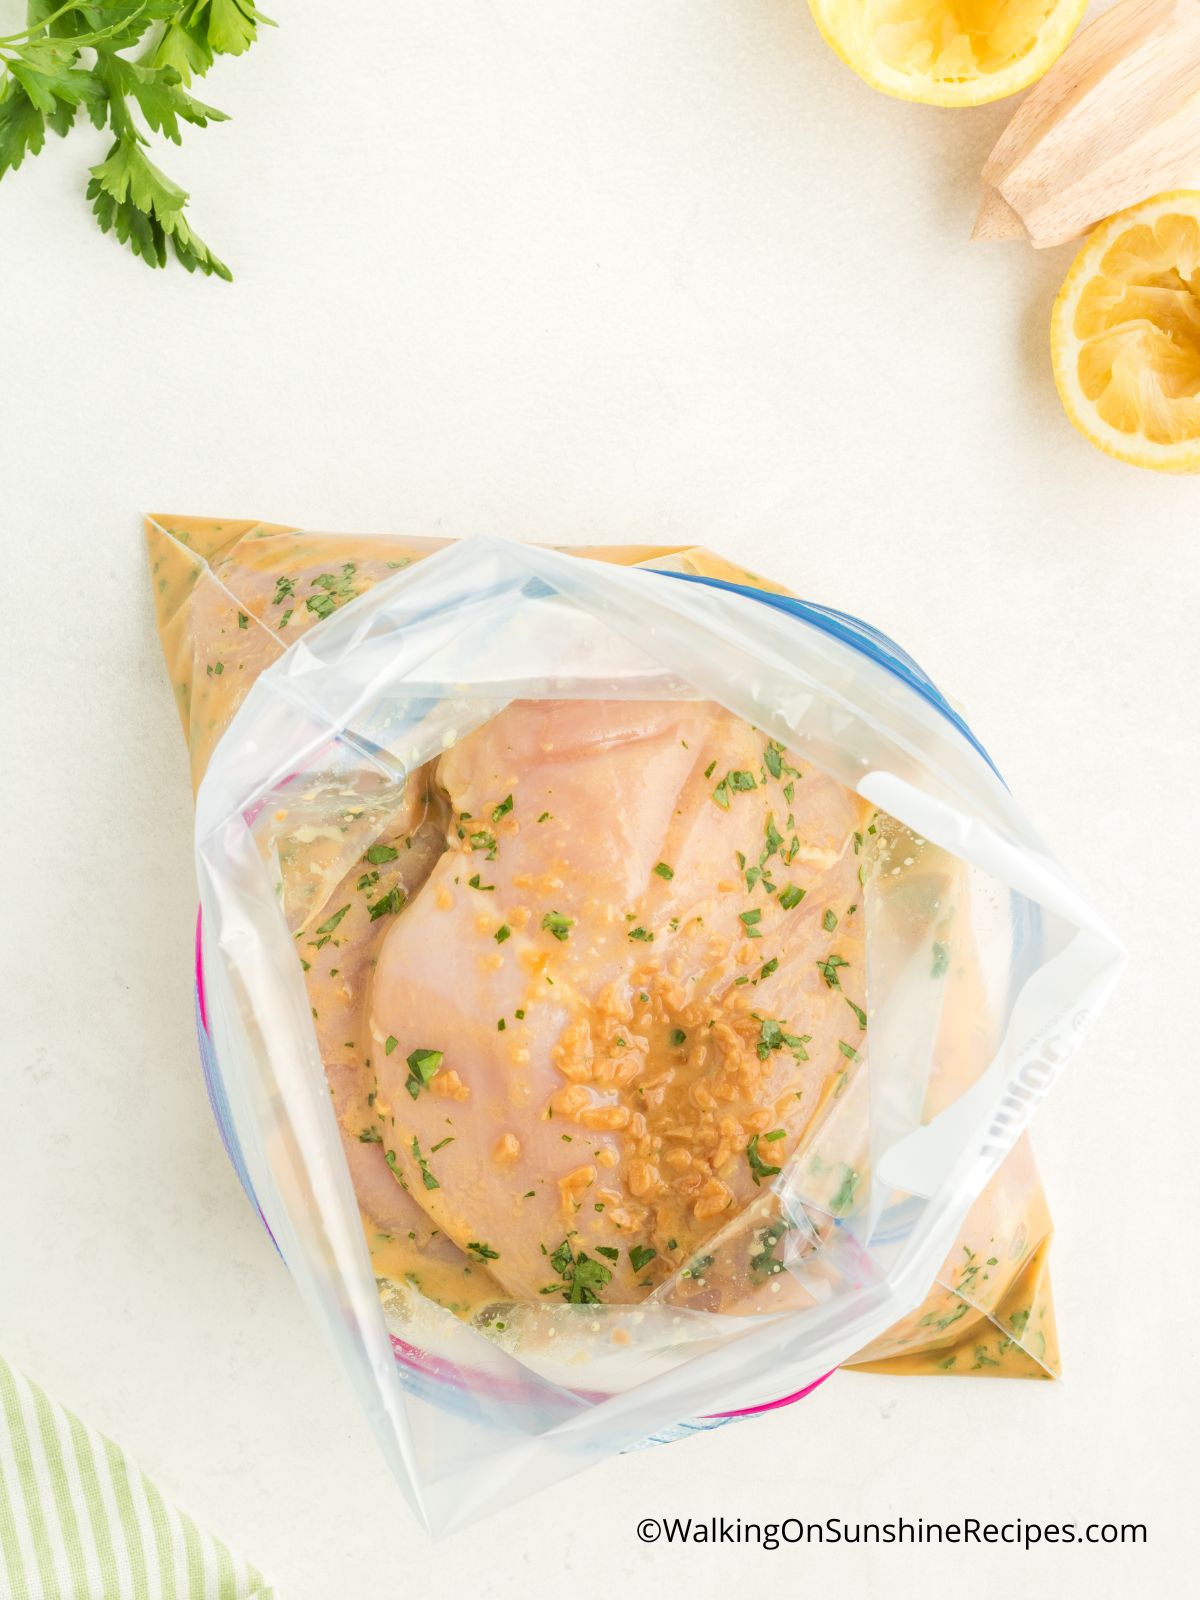 Add marinade in plastic bag with chicken breasts to freeze.